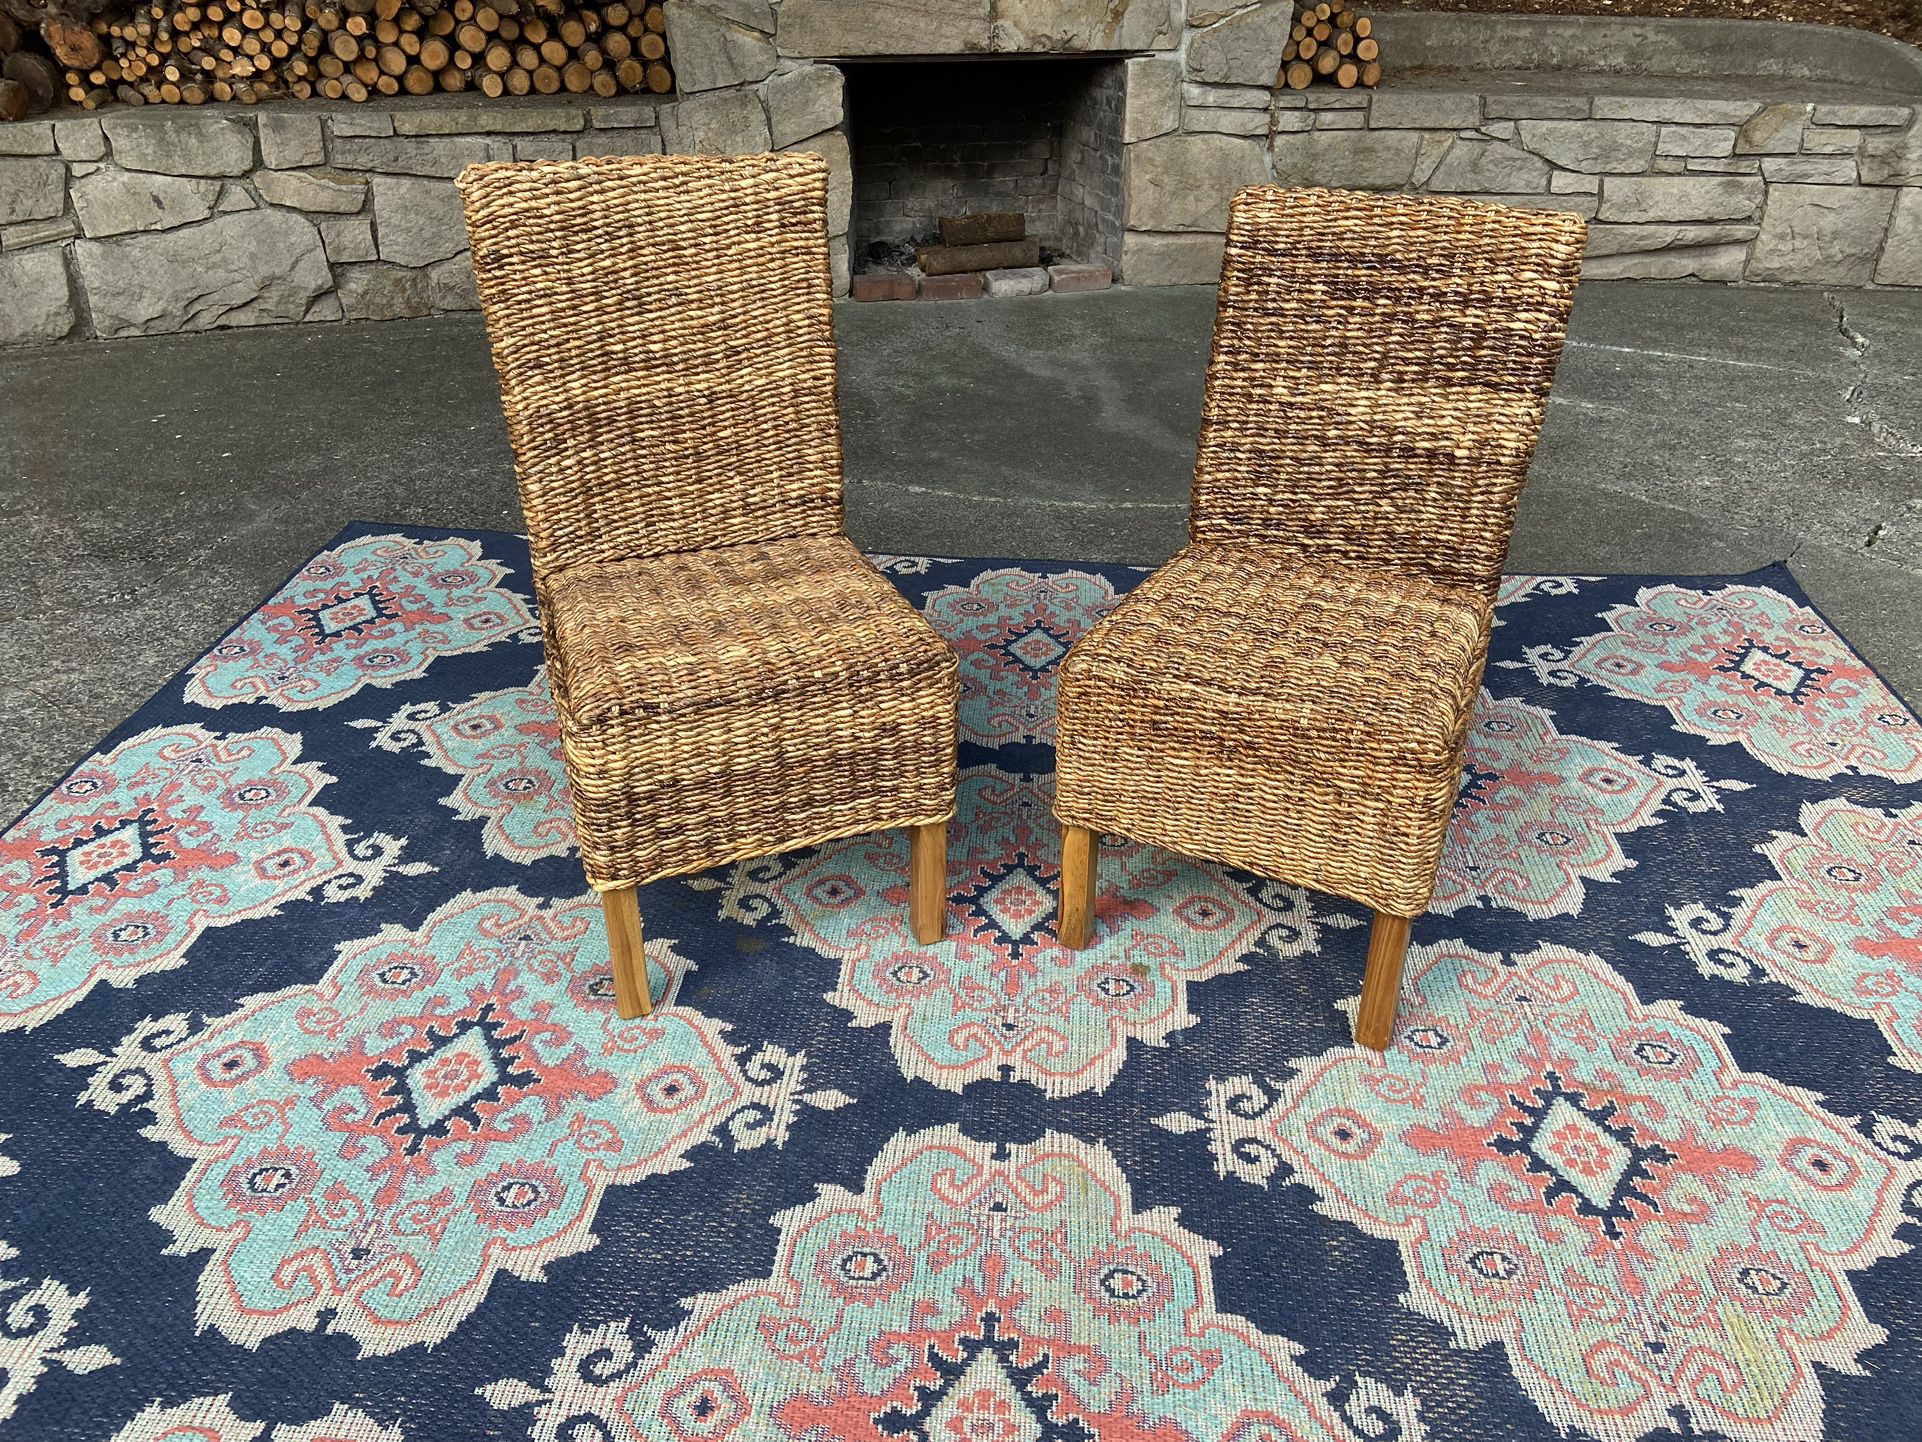 Coastal Chic Wicker Dining Chairs (new)